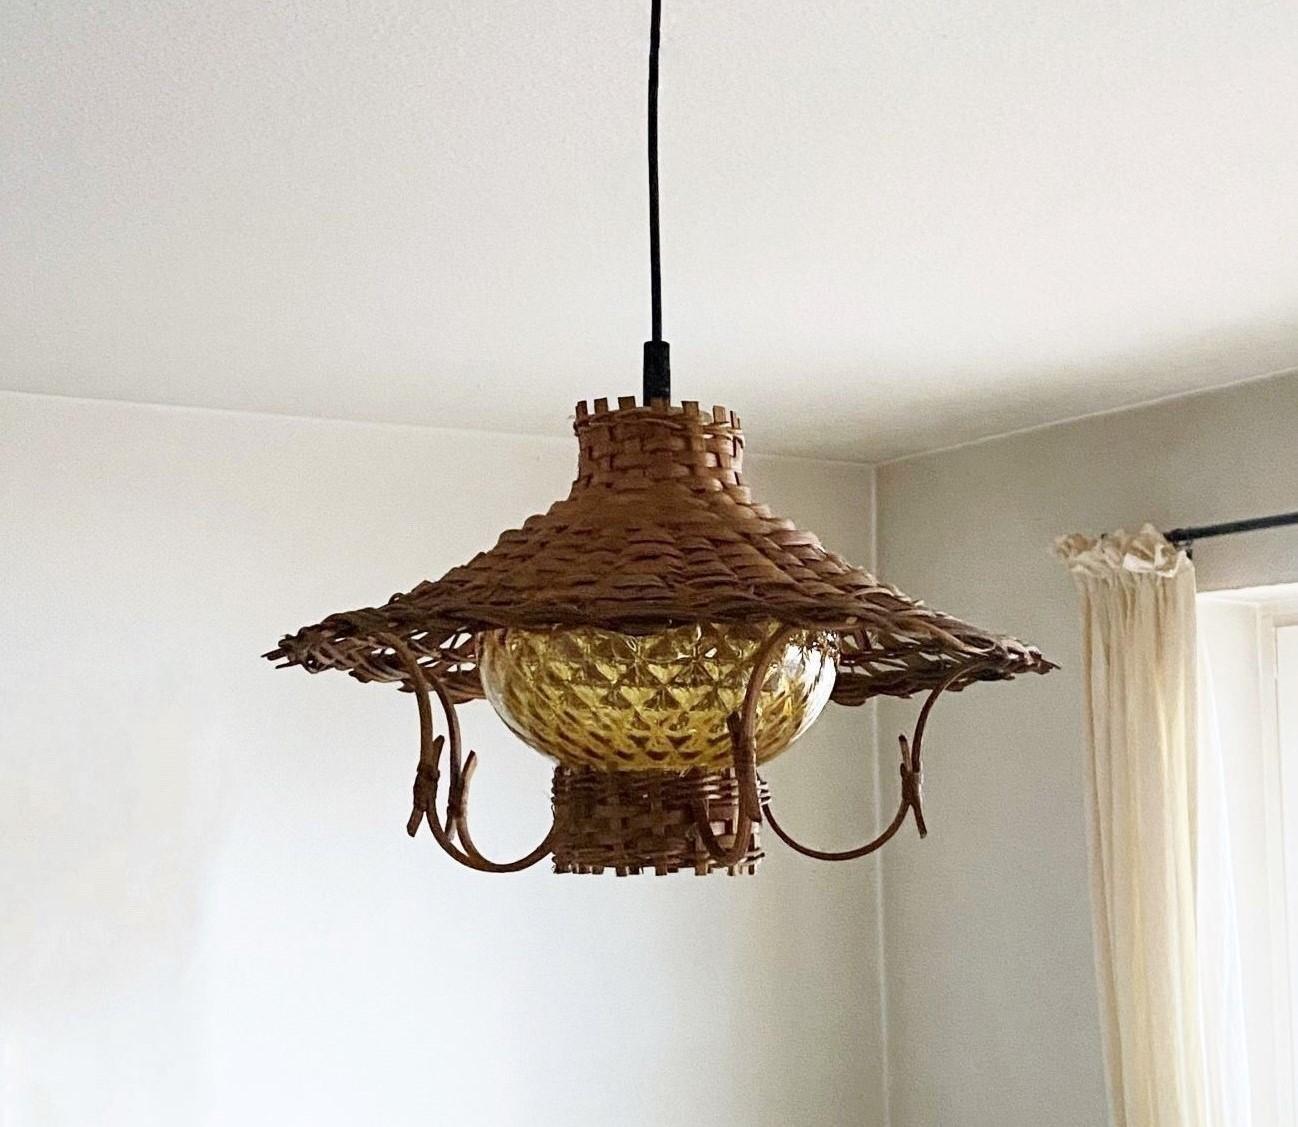 A lovely true Vintage Scandinavian hand-woven rattan pendant, Denmark, 1960s, with a hurricane amber glass shade provinding a warm and pleasant light. This beautiful lamp is in fine vintage condition, no damages, rewired. It takes one Edison E27